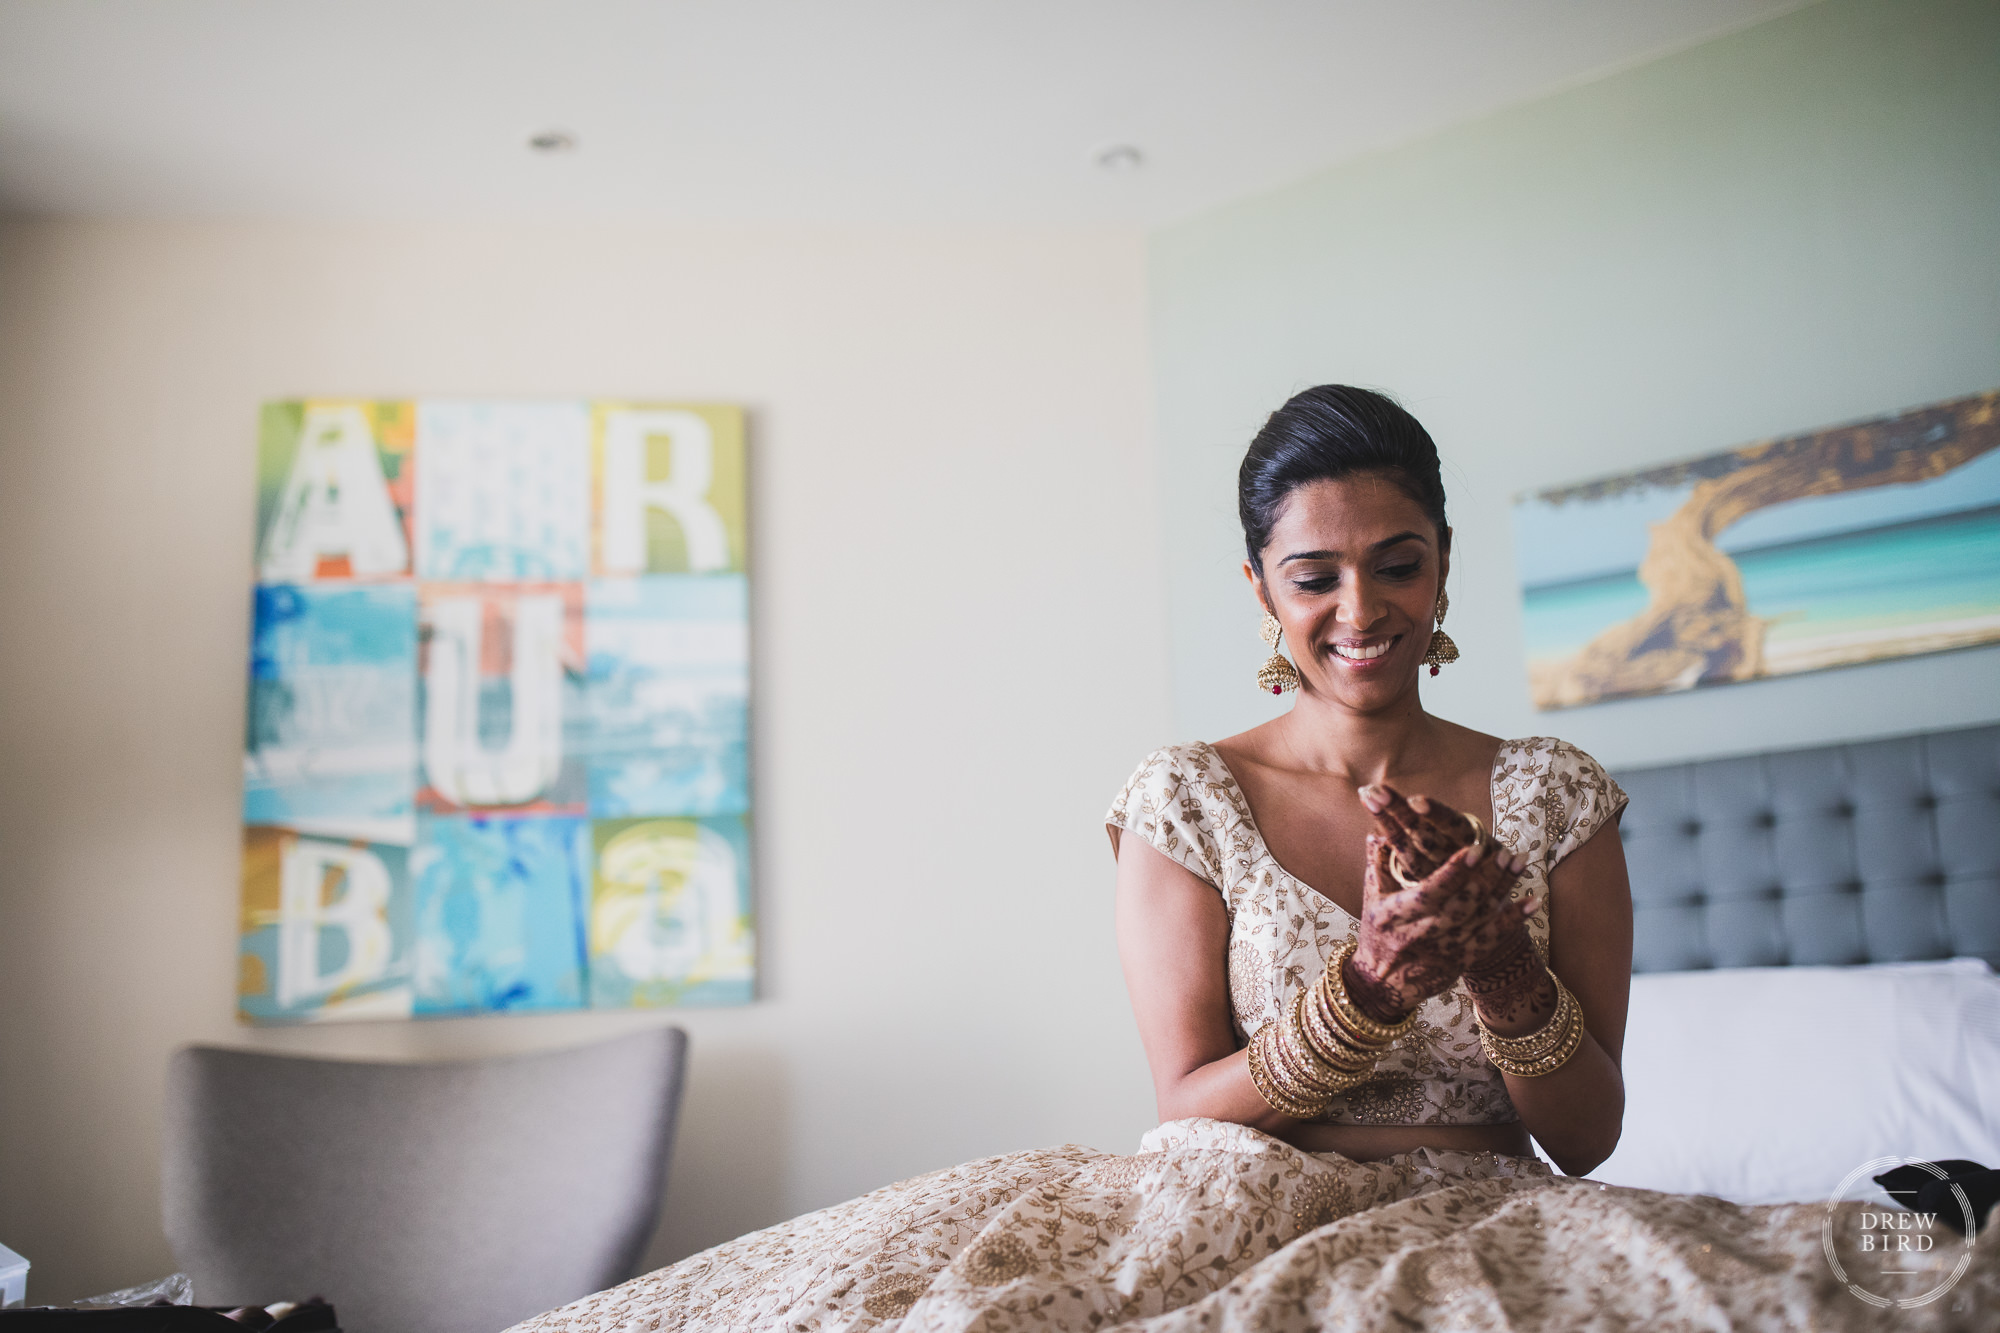 Indian wedding bride getting ready putting bracelets on her wrists. She is in her wedding dress and her hands are adorned with traditioanal henna painting. A professional wedding photography story by Drew Bird at the Hilton Aruba resort.